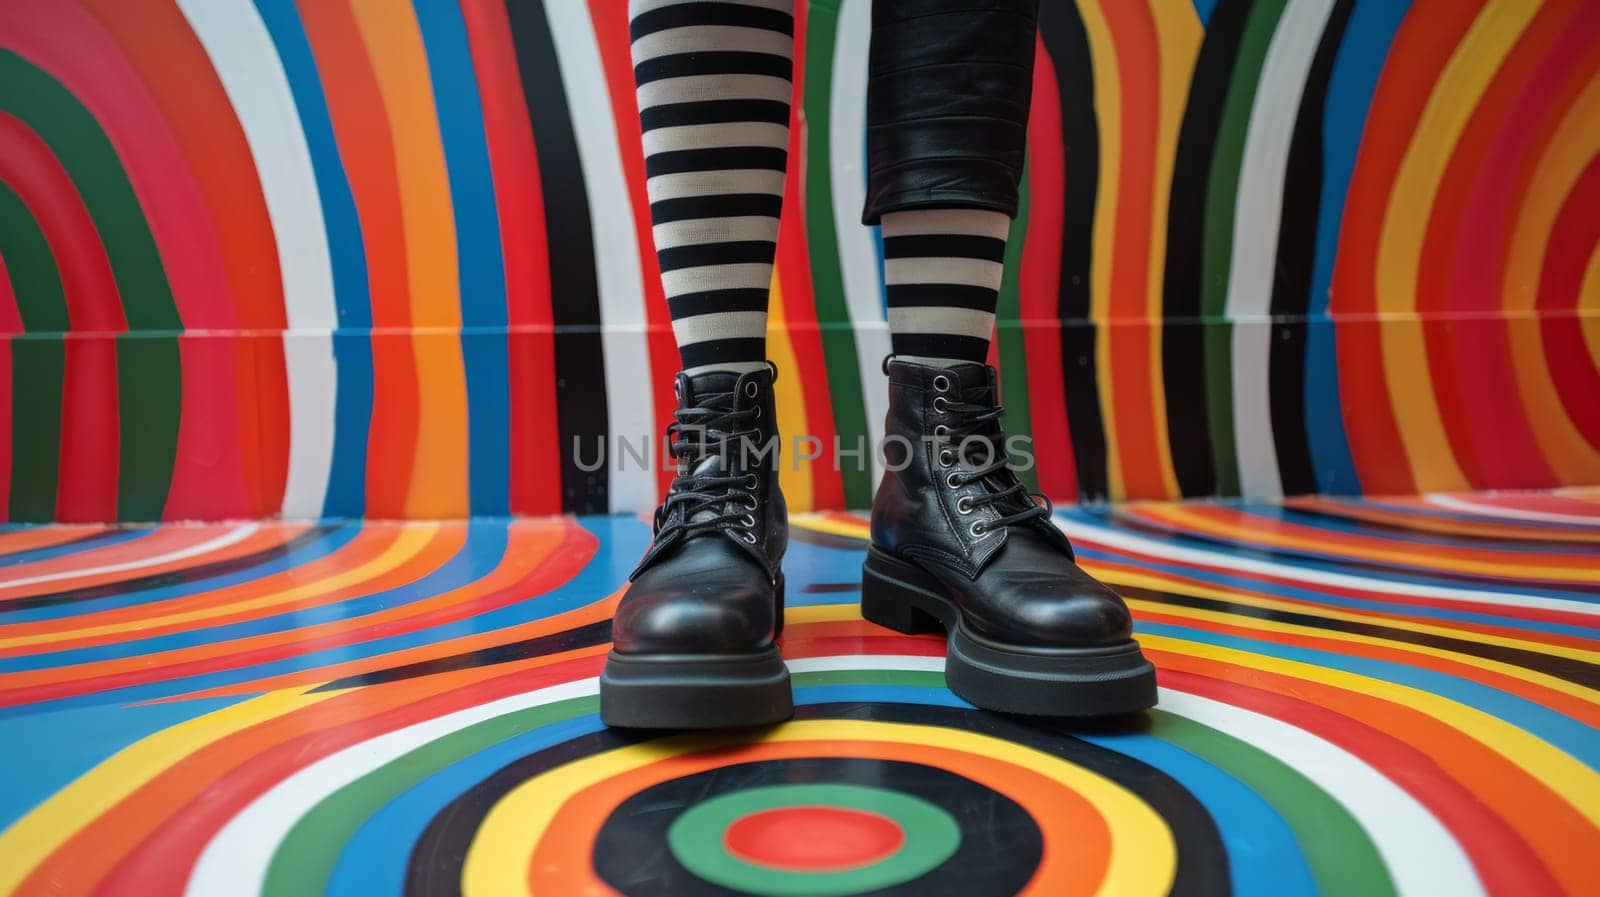 A person wearing black boots and striped socks standing on a colorful floor